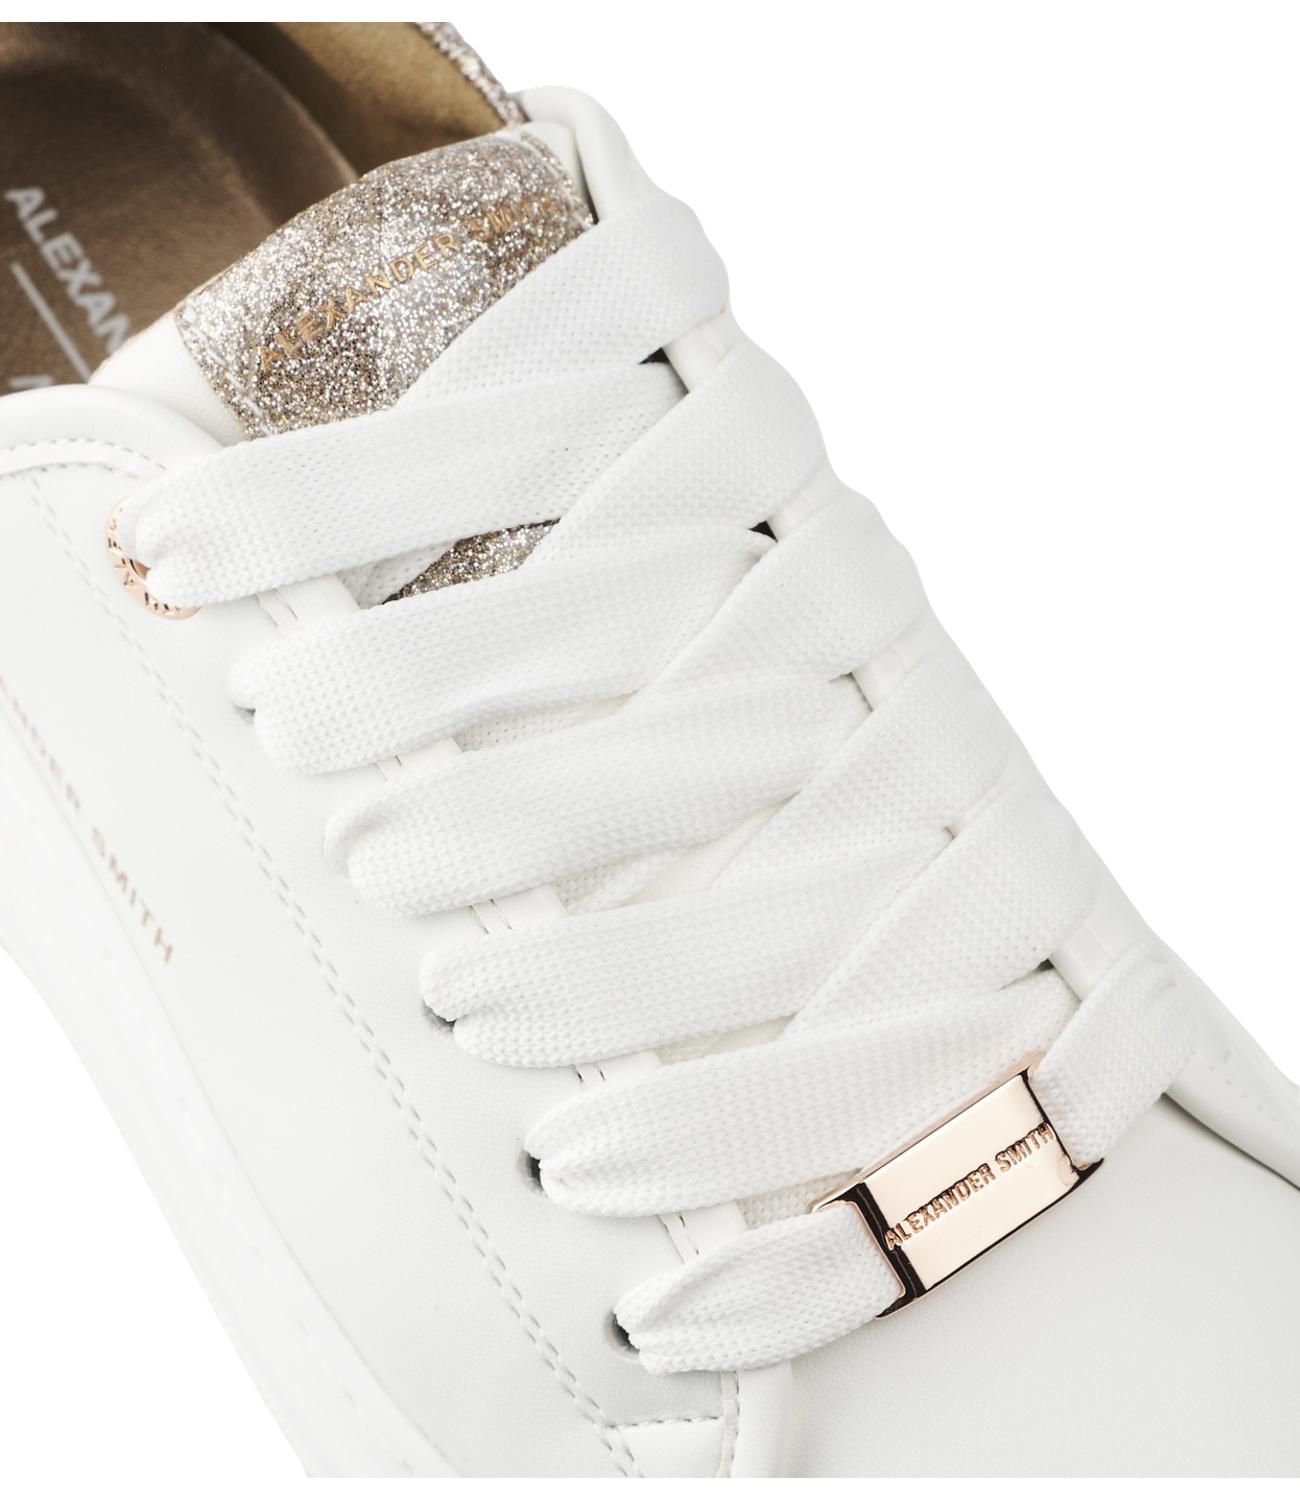 Alexander Smith sneakers Eco Wembley white copper